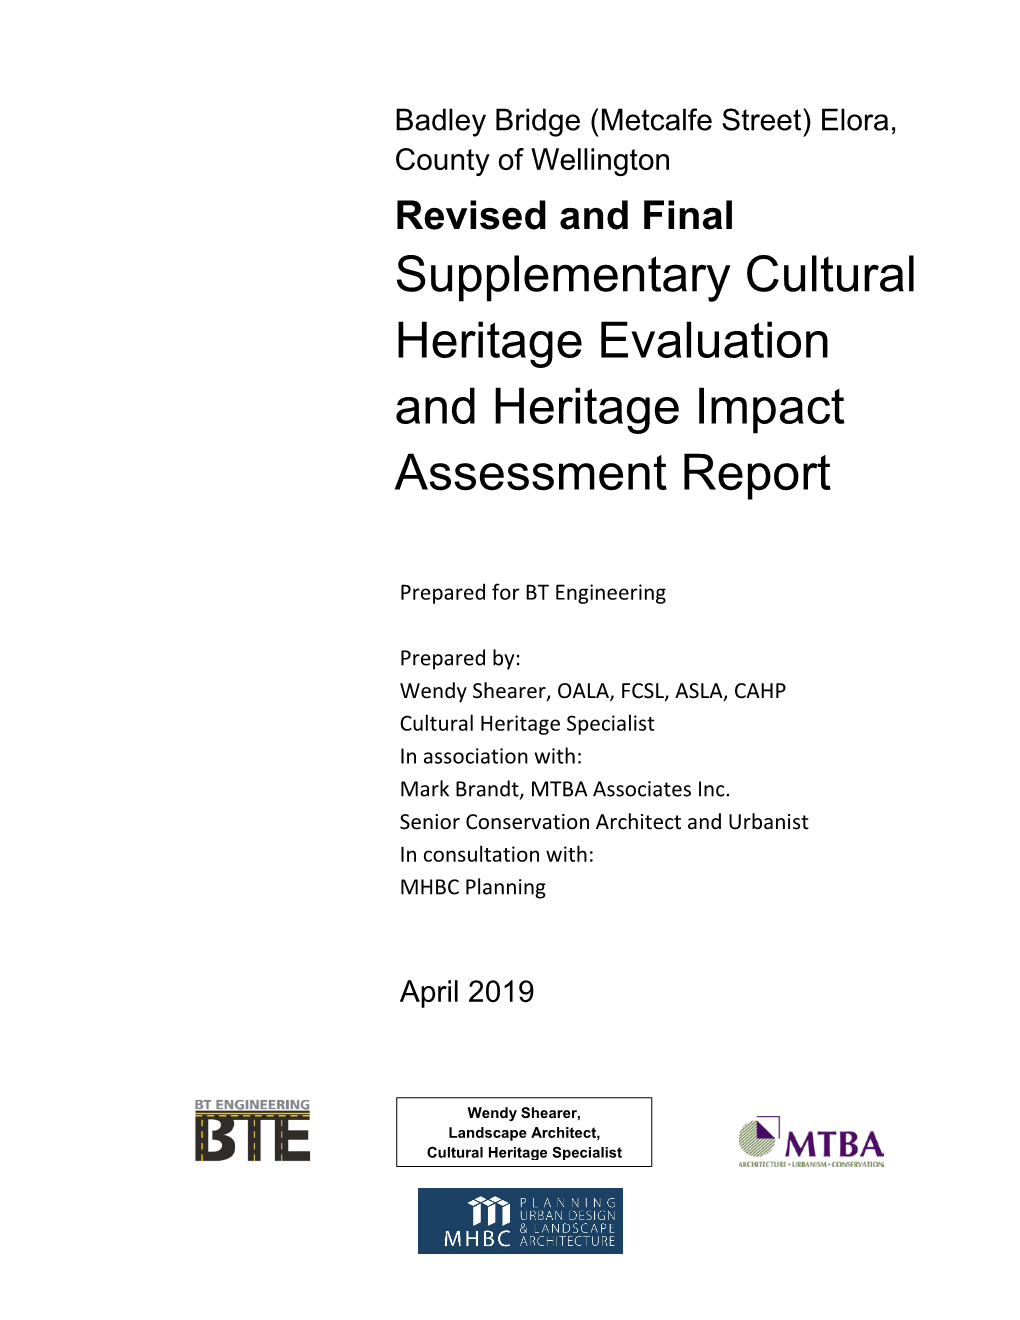 Supplementary Cultural Heritage Report